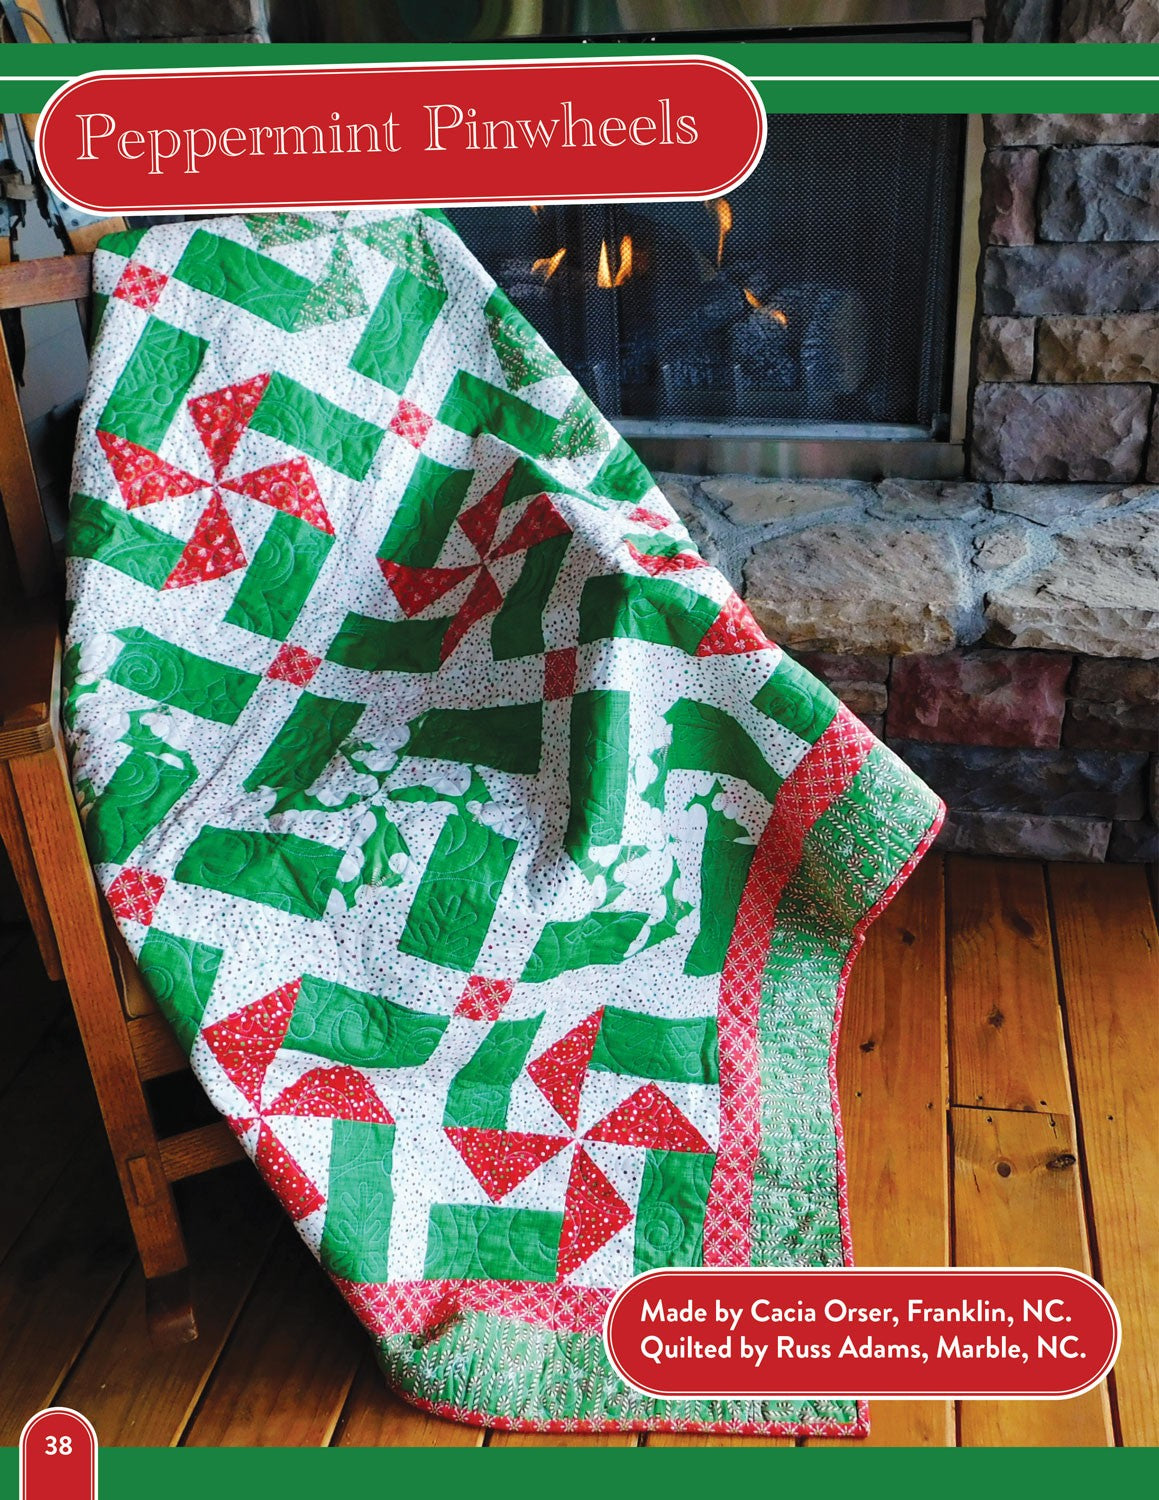 Quilting Books for Every Season — Chatterbox Quilts